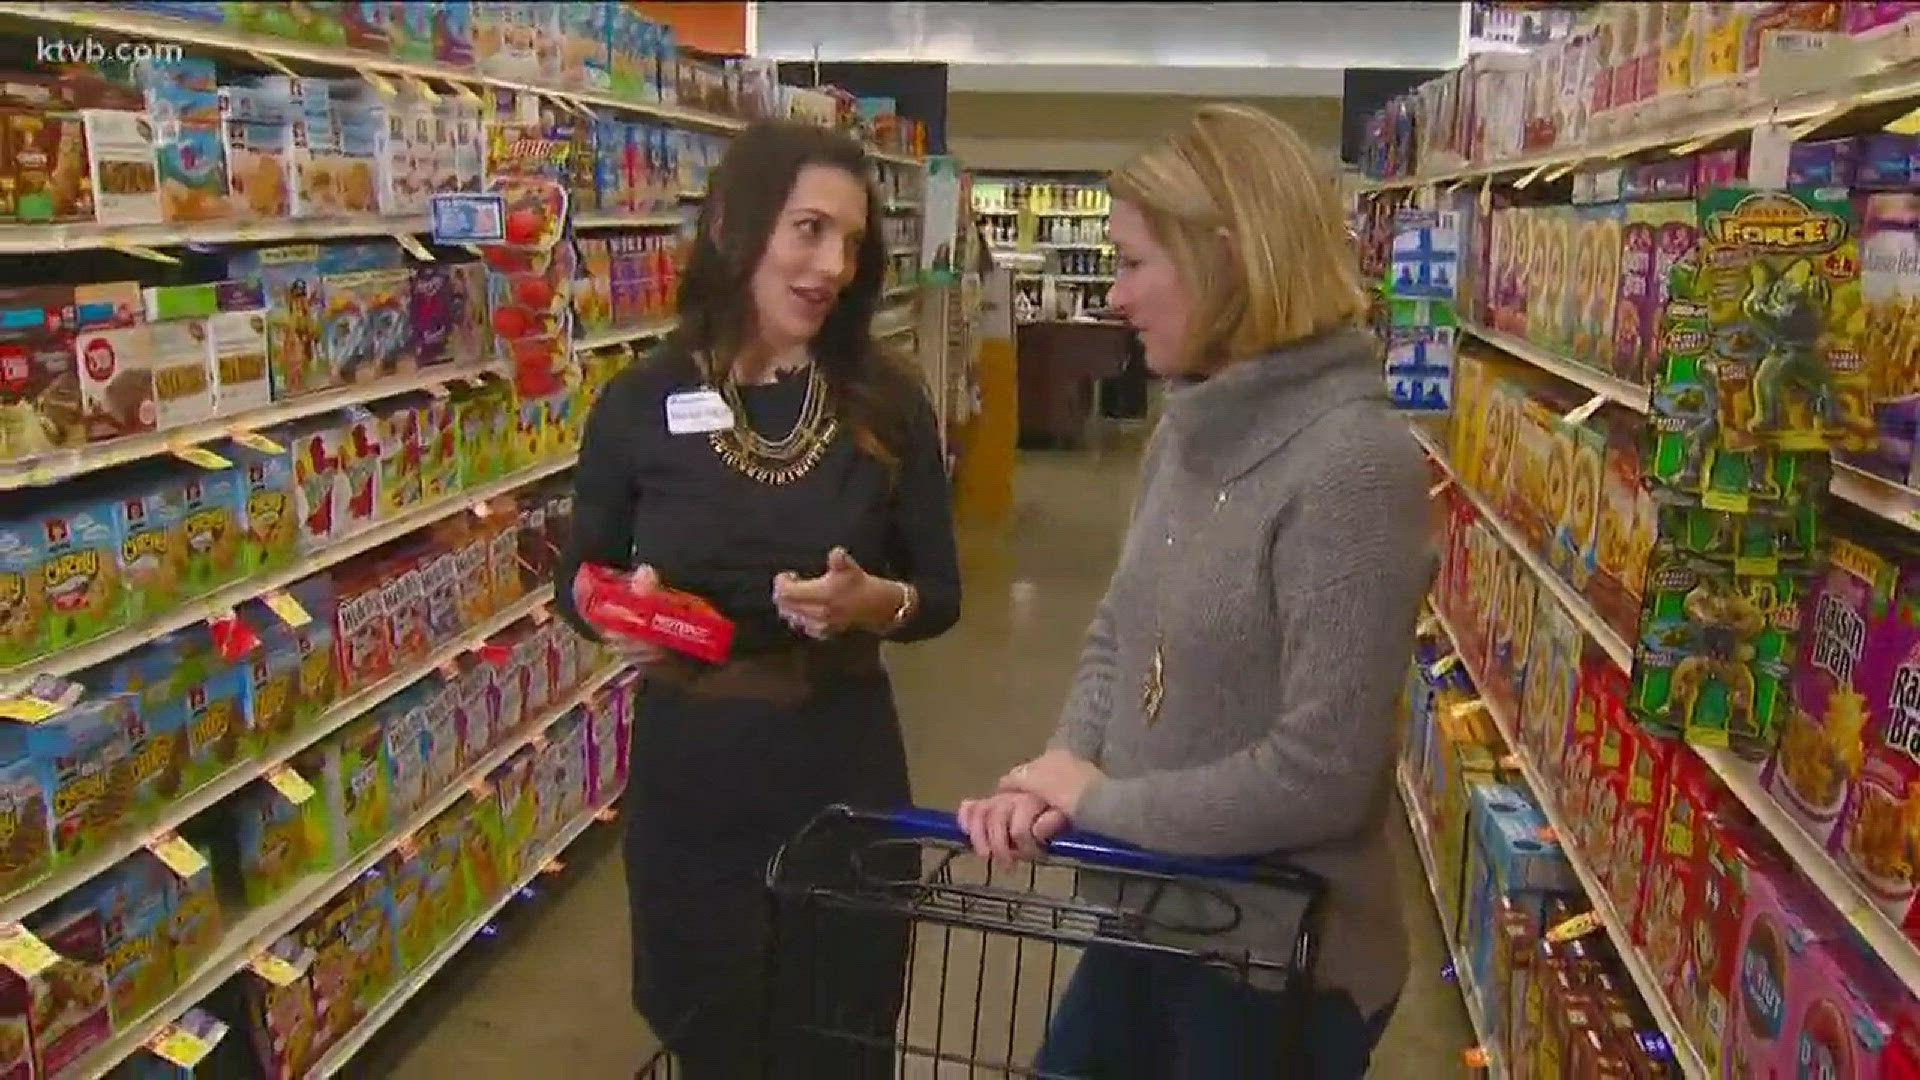 KTVB took a typical grocery list to Molly Tevis, an in-store registered dietitian with Albertsons, to learn how to shop smarter.